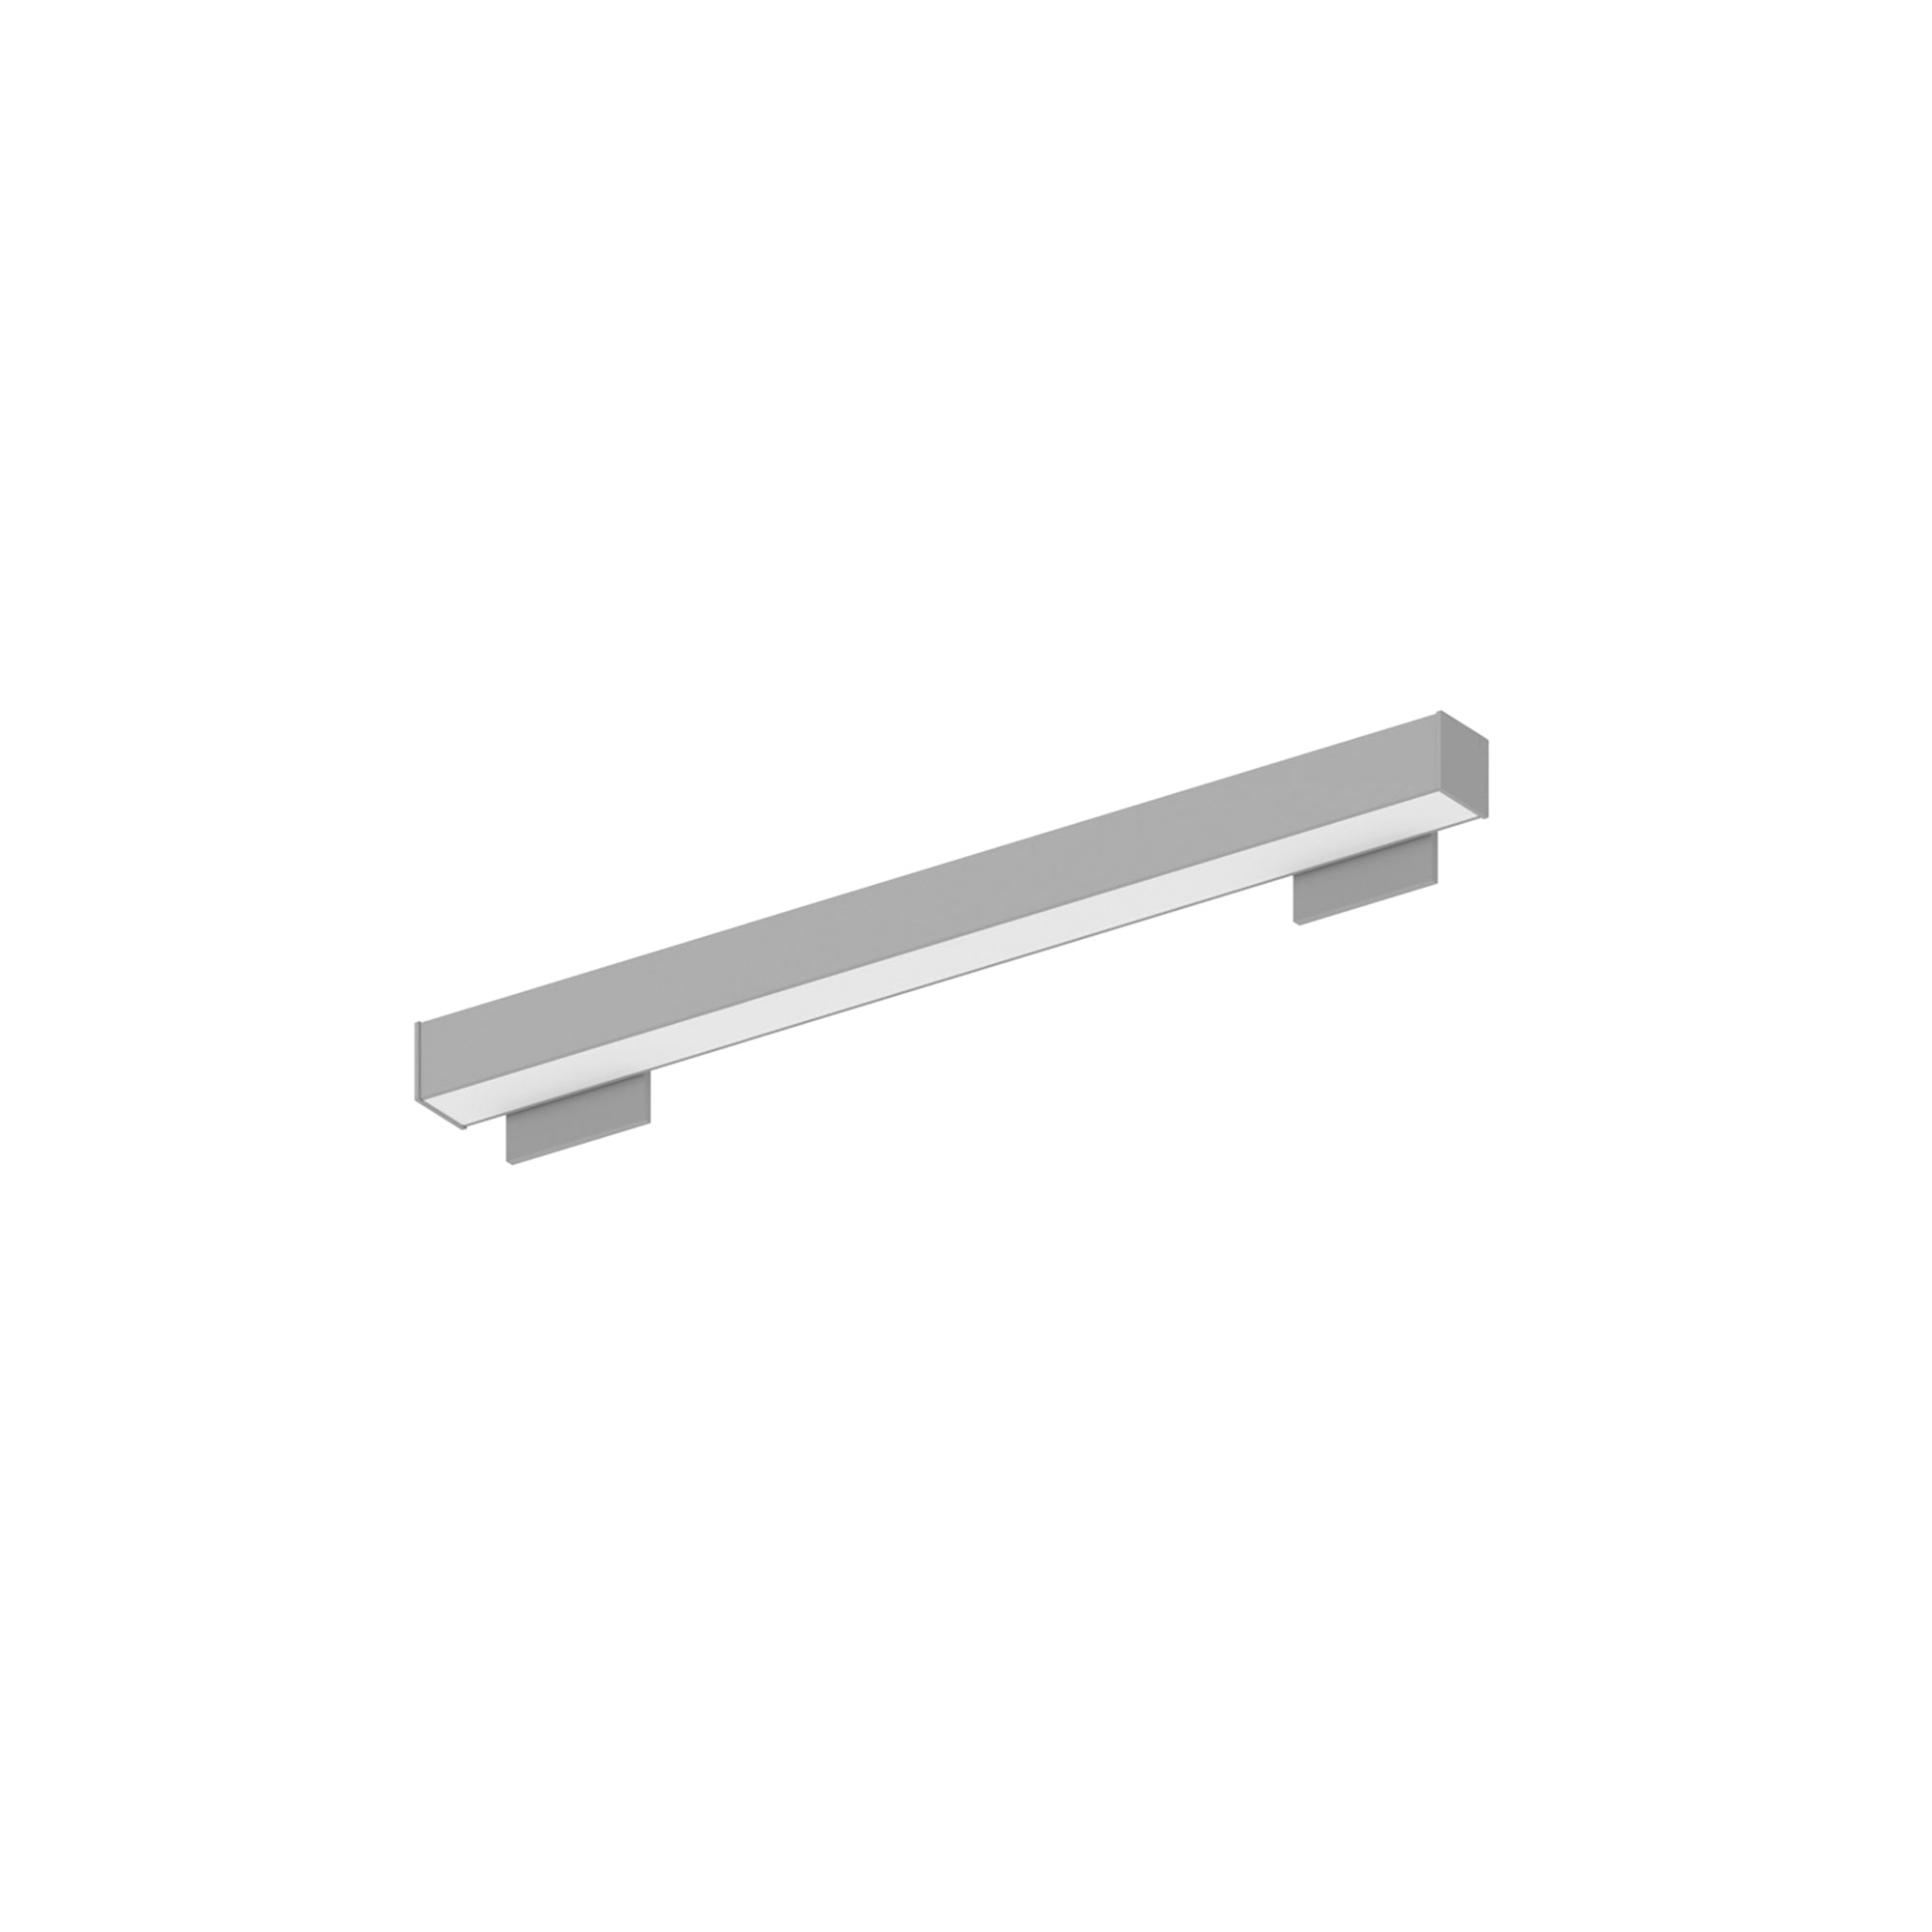 Nora Lighting NWLIN-21040A/L4P-R4 - Linear - 2' L-Line LED Wall Mount Linear, 2100lm / 4000K, 4 Inchx4 Inch Left Plate & 4 Inchx4 Inch Right Plate, Left Power Feed, Aluminum Finish